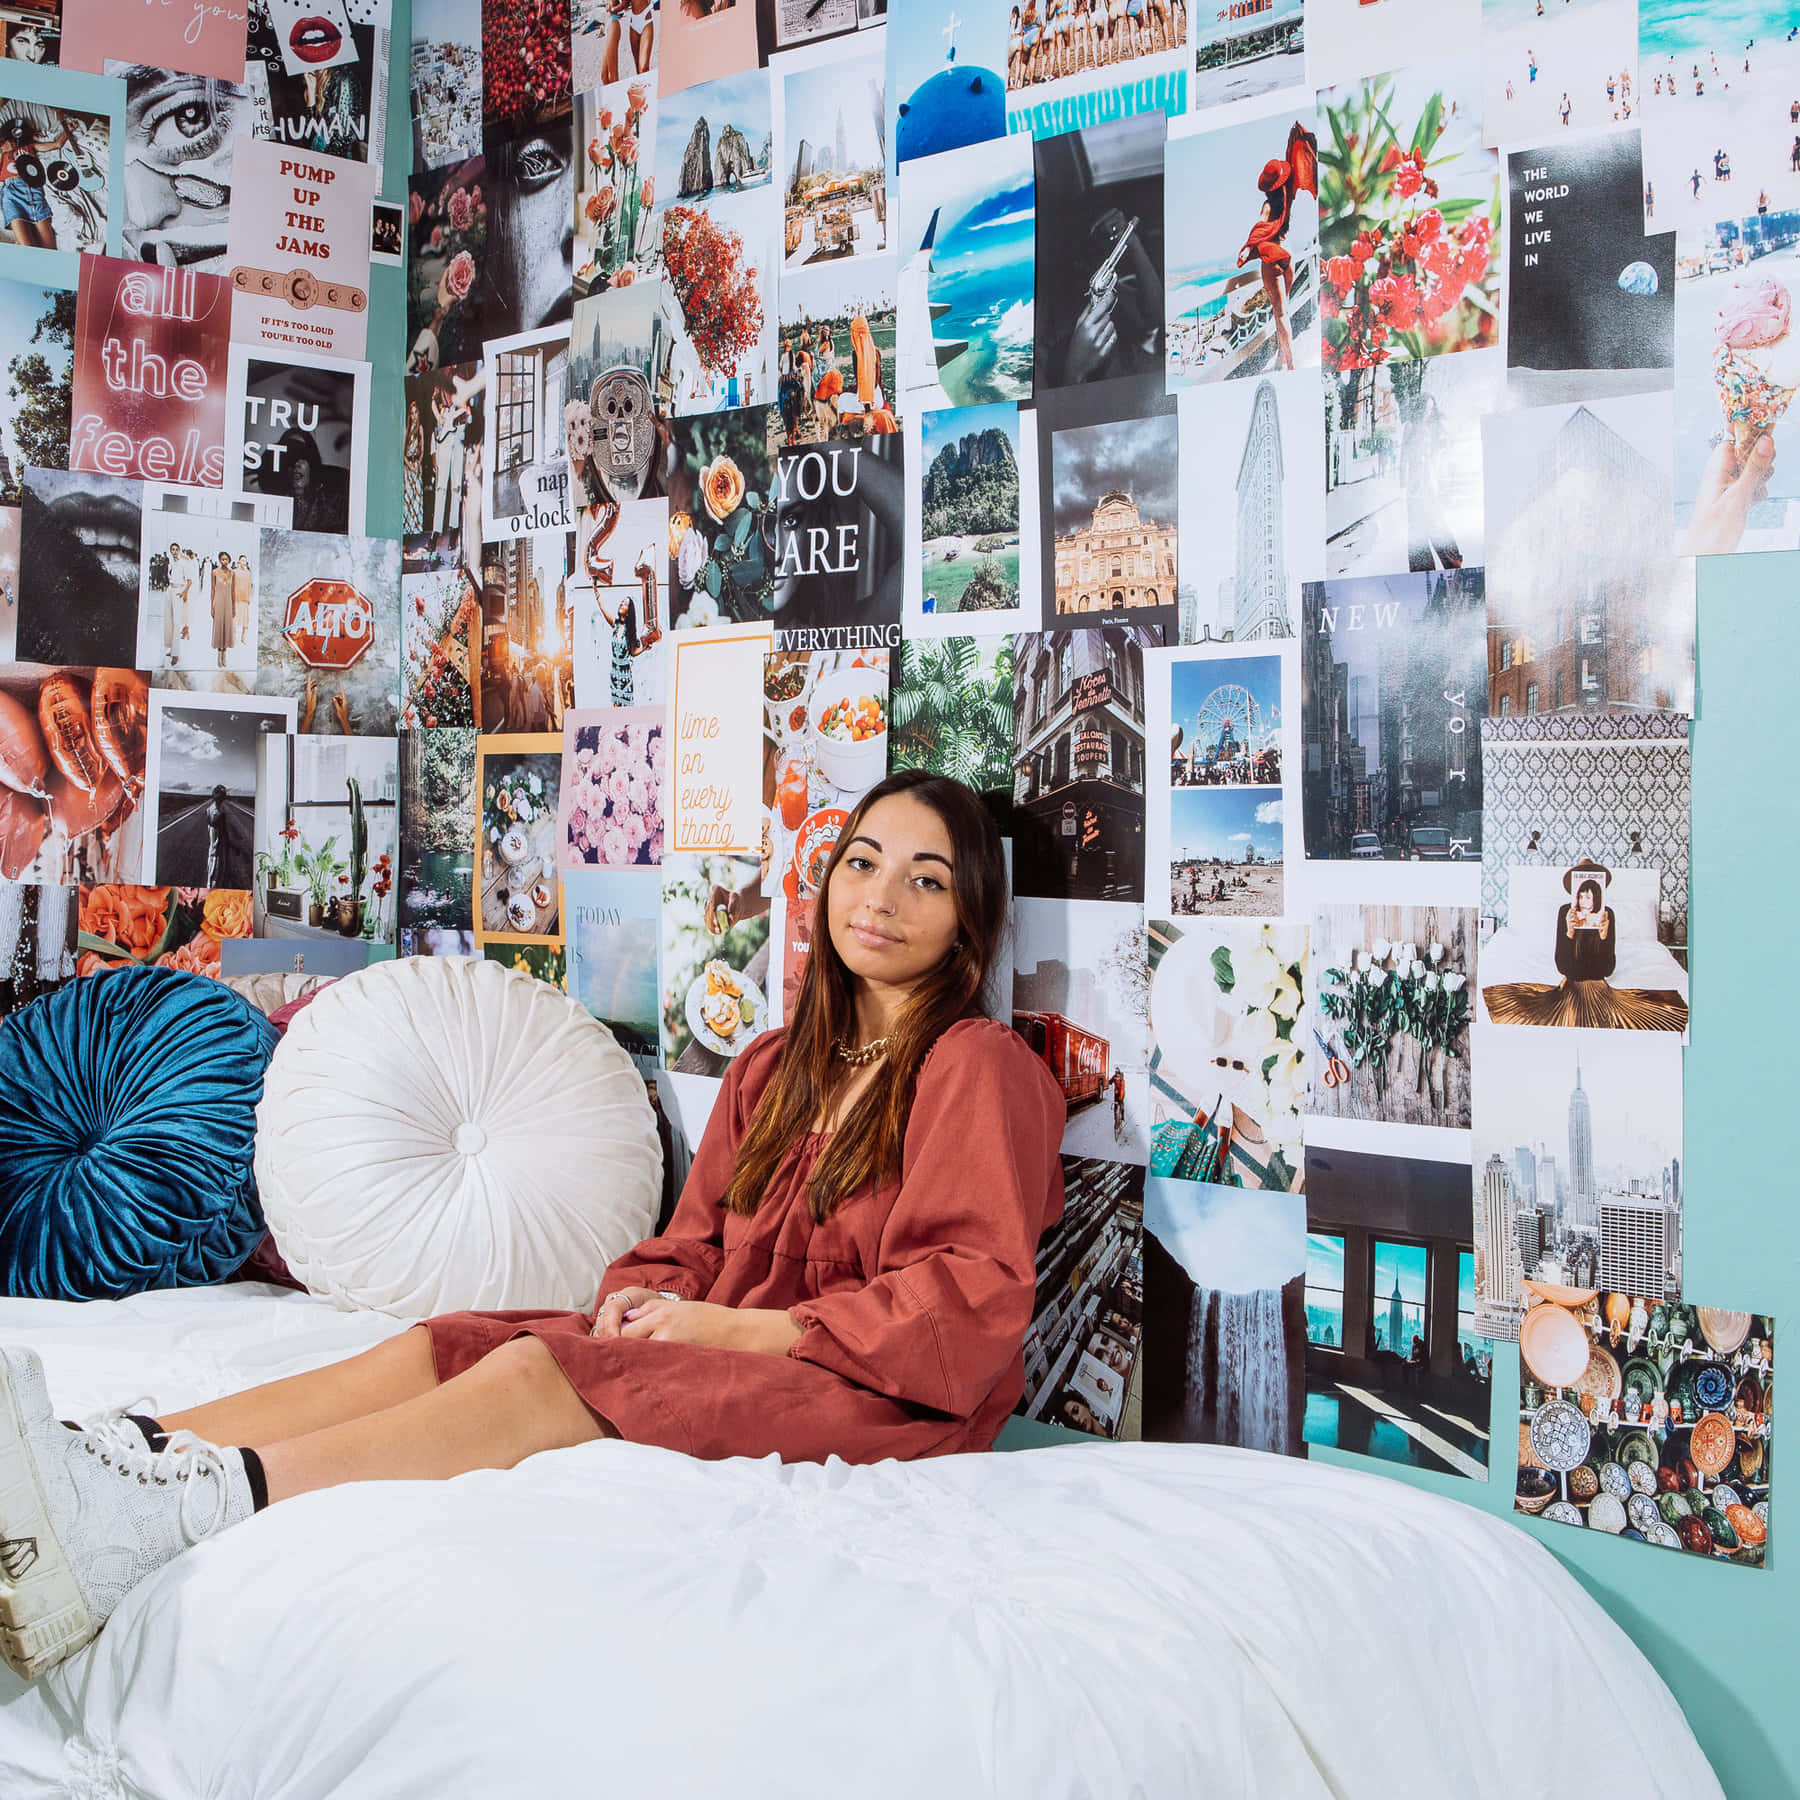 A Girl Sitting On A Bed With A Lot Of Pictures On The Wall